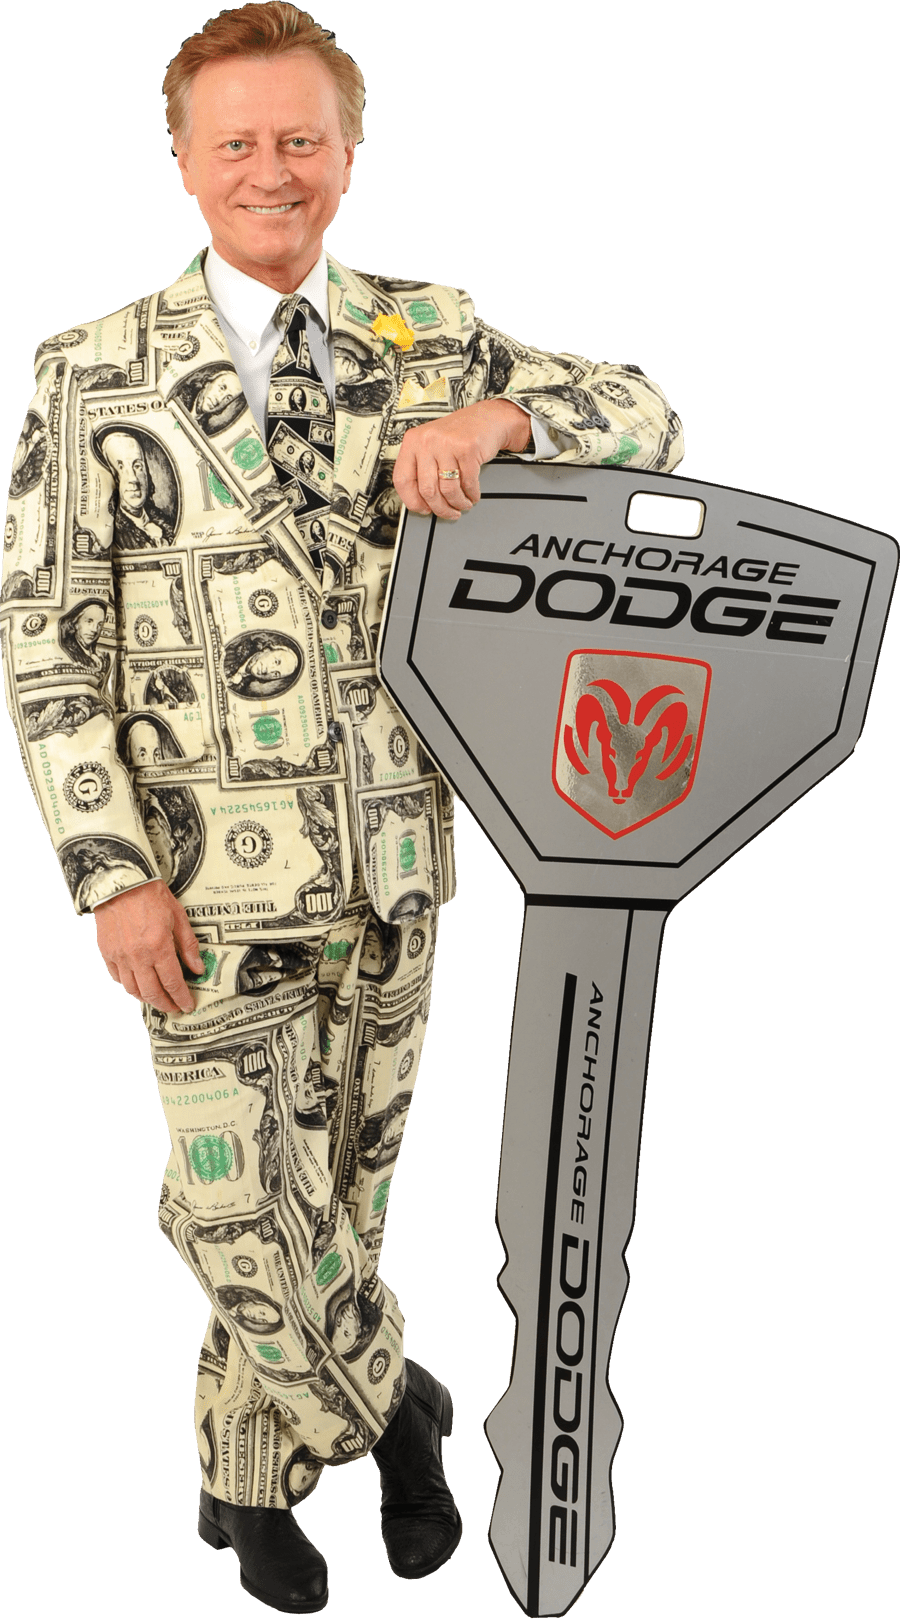 Man in a money suit standing next to key